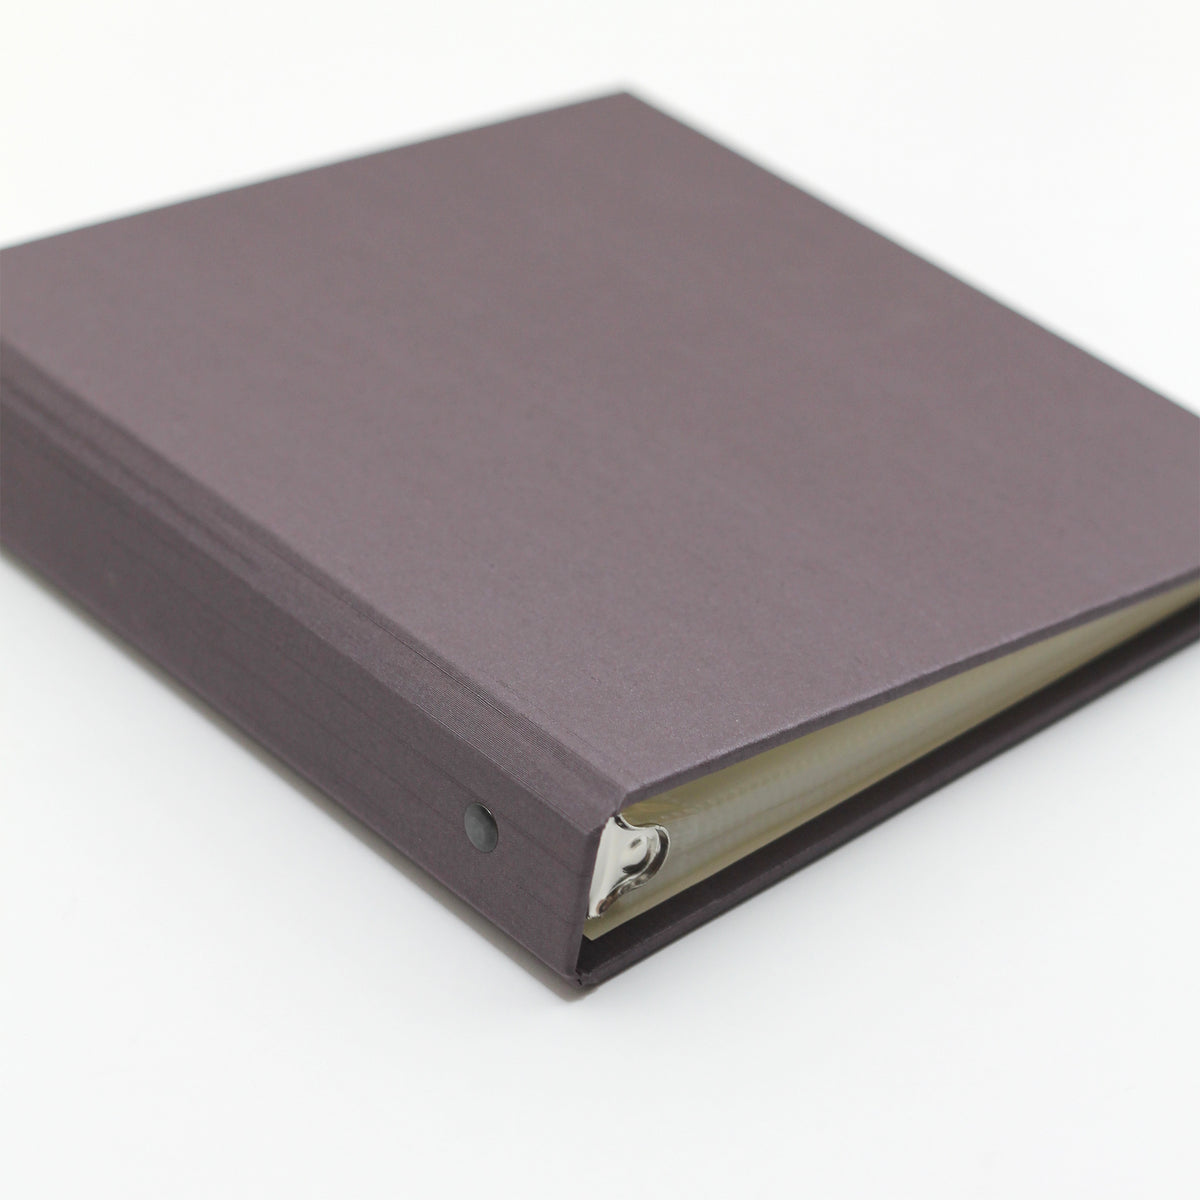 Medium Photo Binder For 4x6 Photos | Cover: Amethyst Silk | Available Personalized